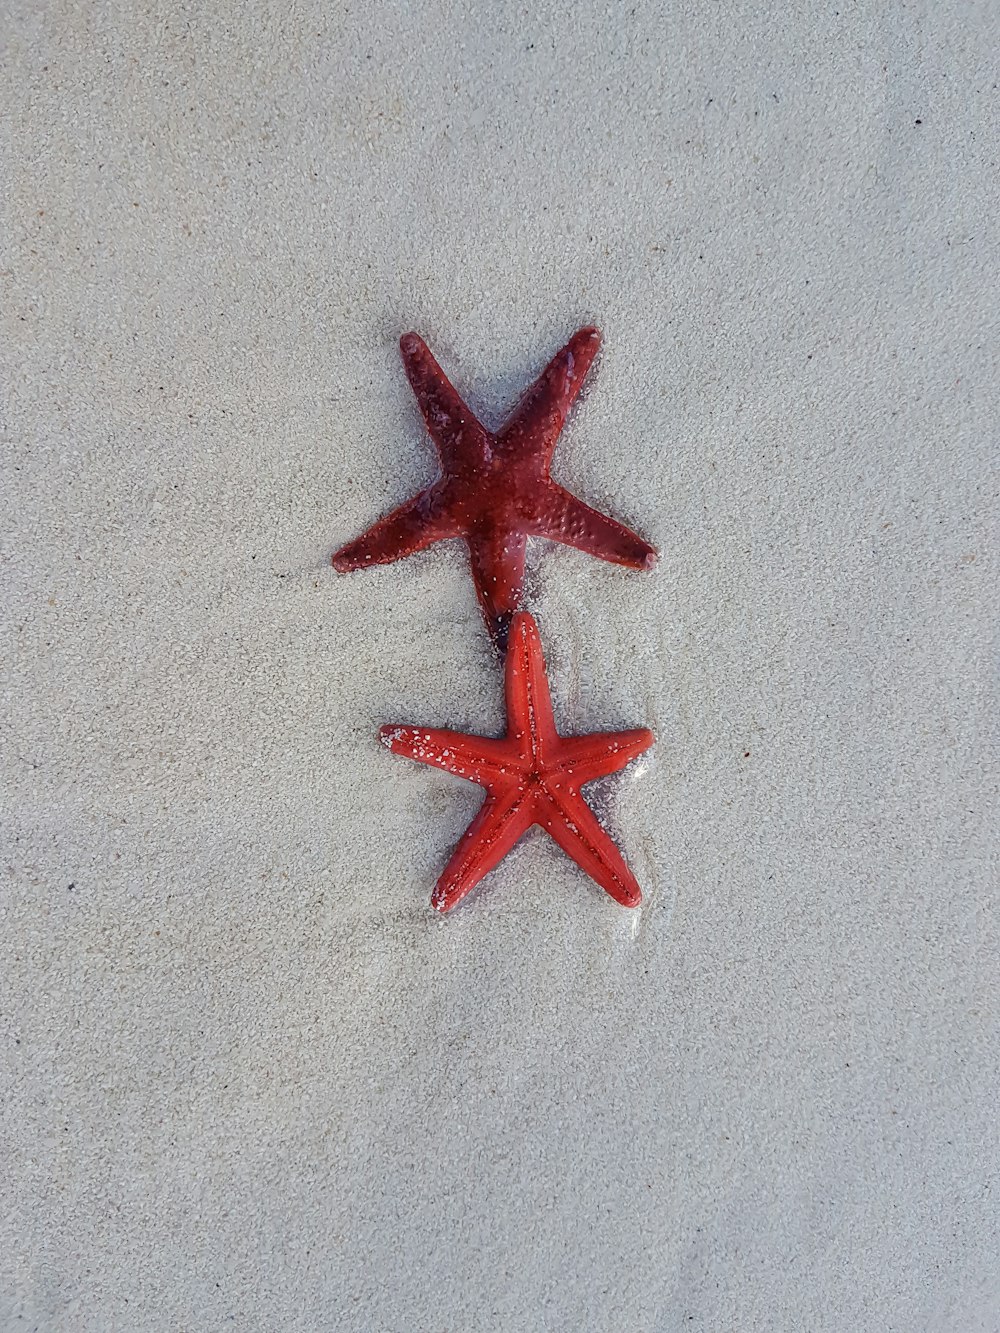 two red starfish on sand